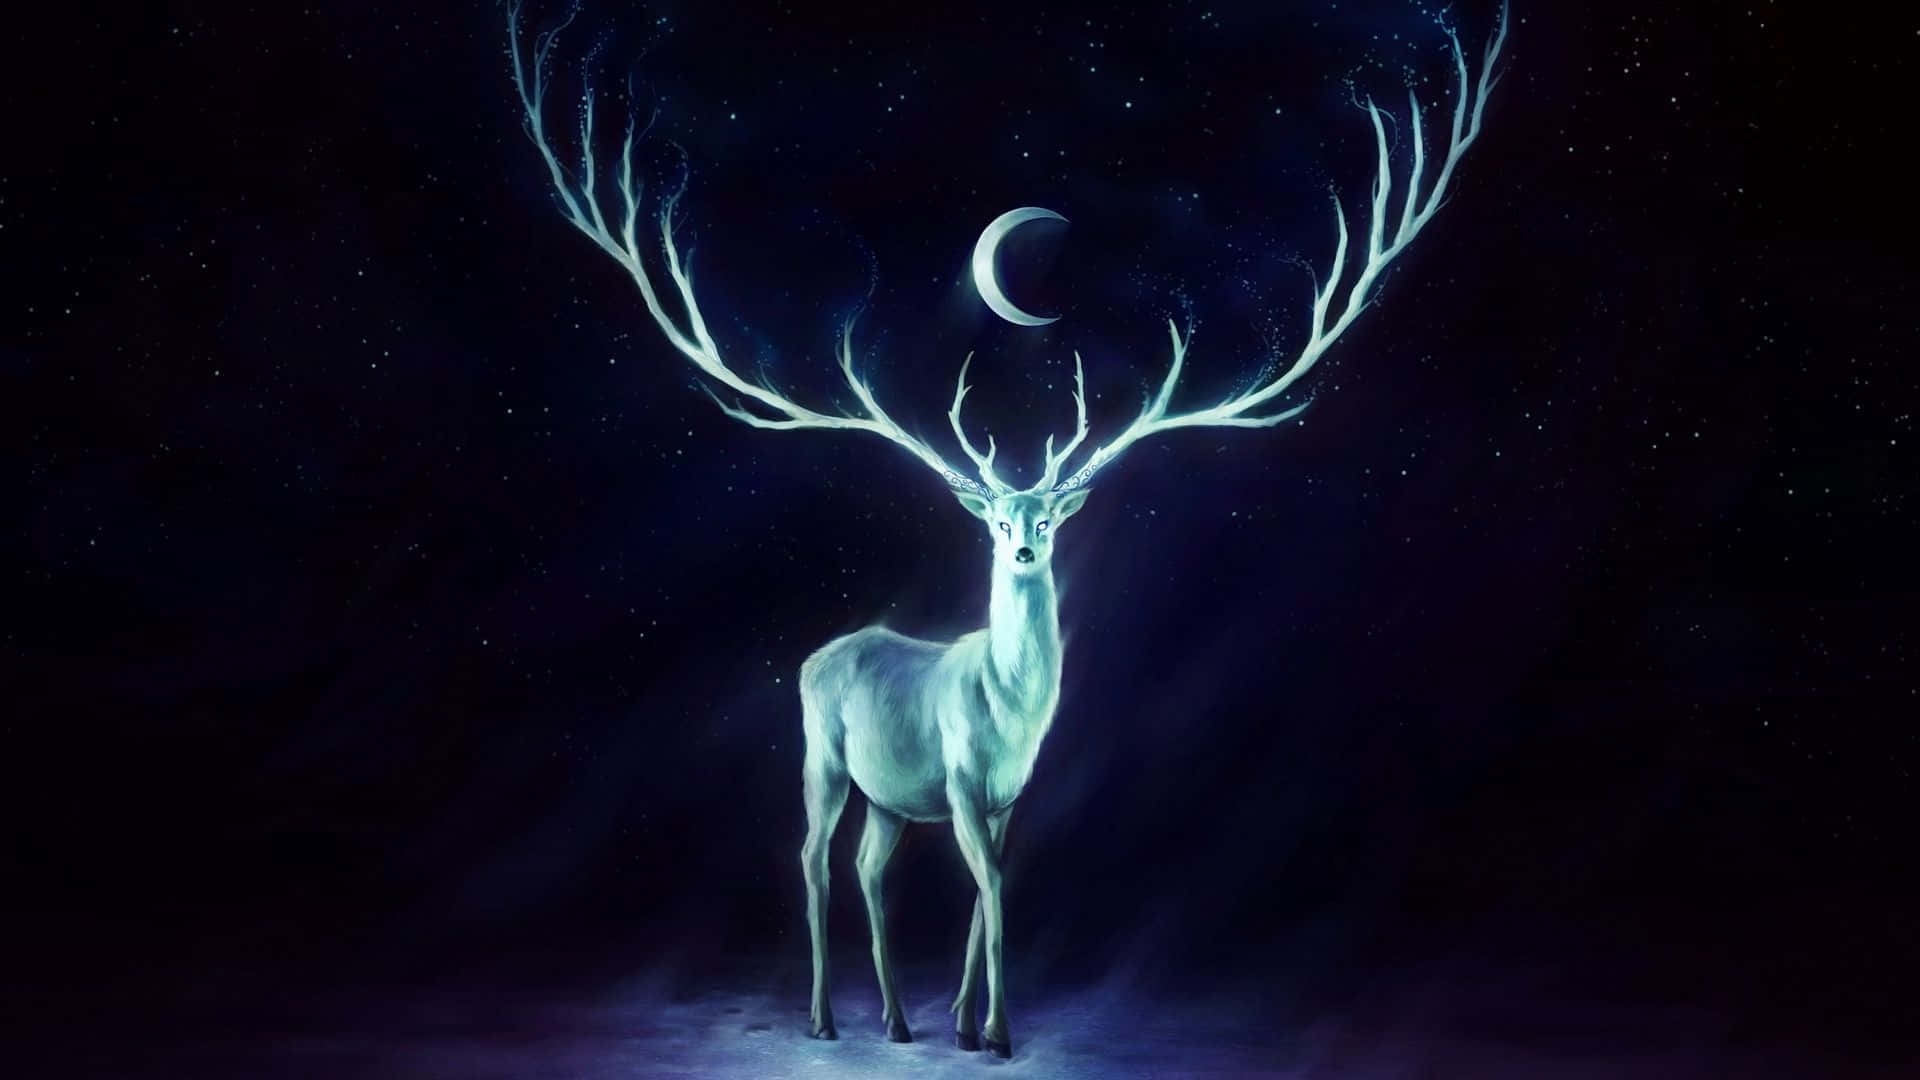 Anime Wilderness: 4K Wallpaper for PC - Majestic Deer in Nature - Free  Download